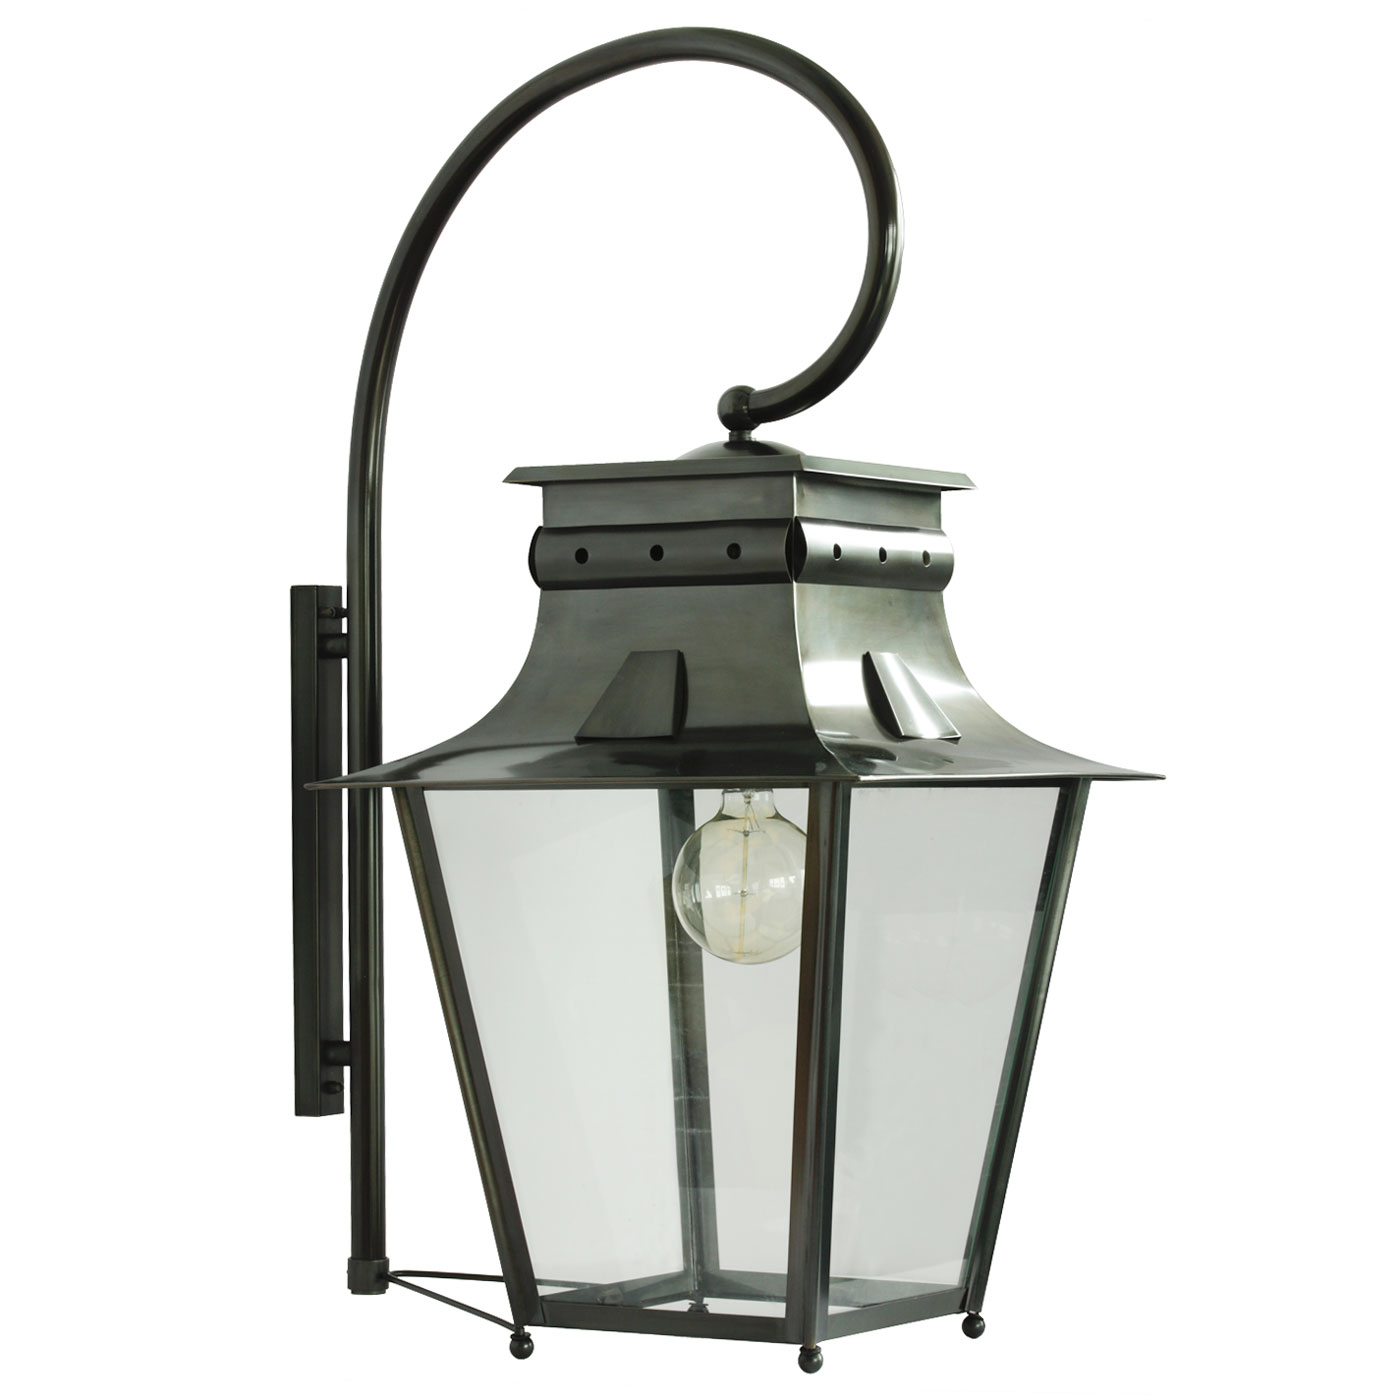 Large Historical Outdoor Wall Light, Simple Outdoor Light Fixtures